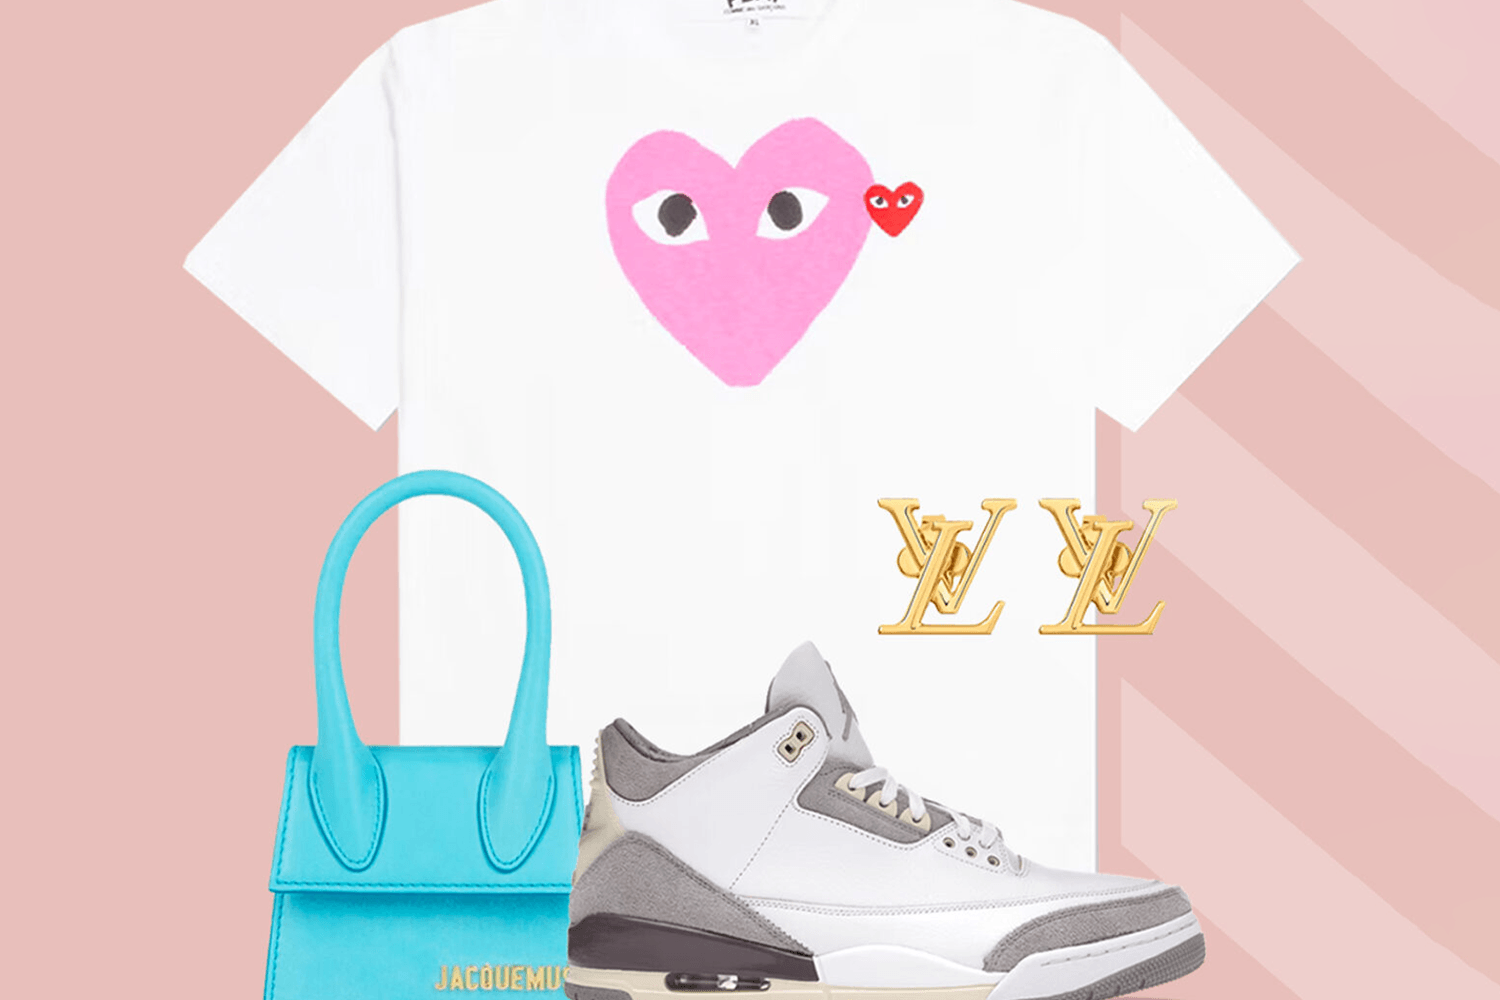 The best gifts for Mother's Day on StockX